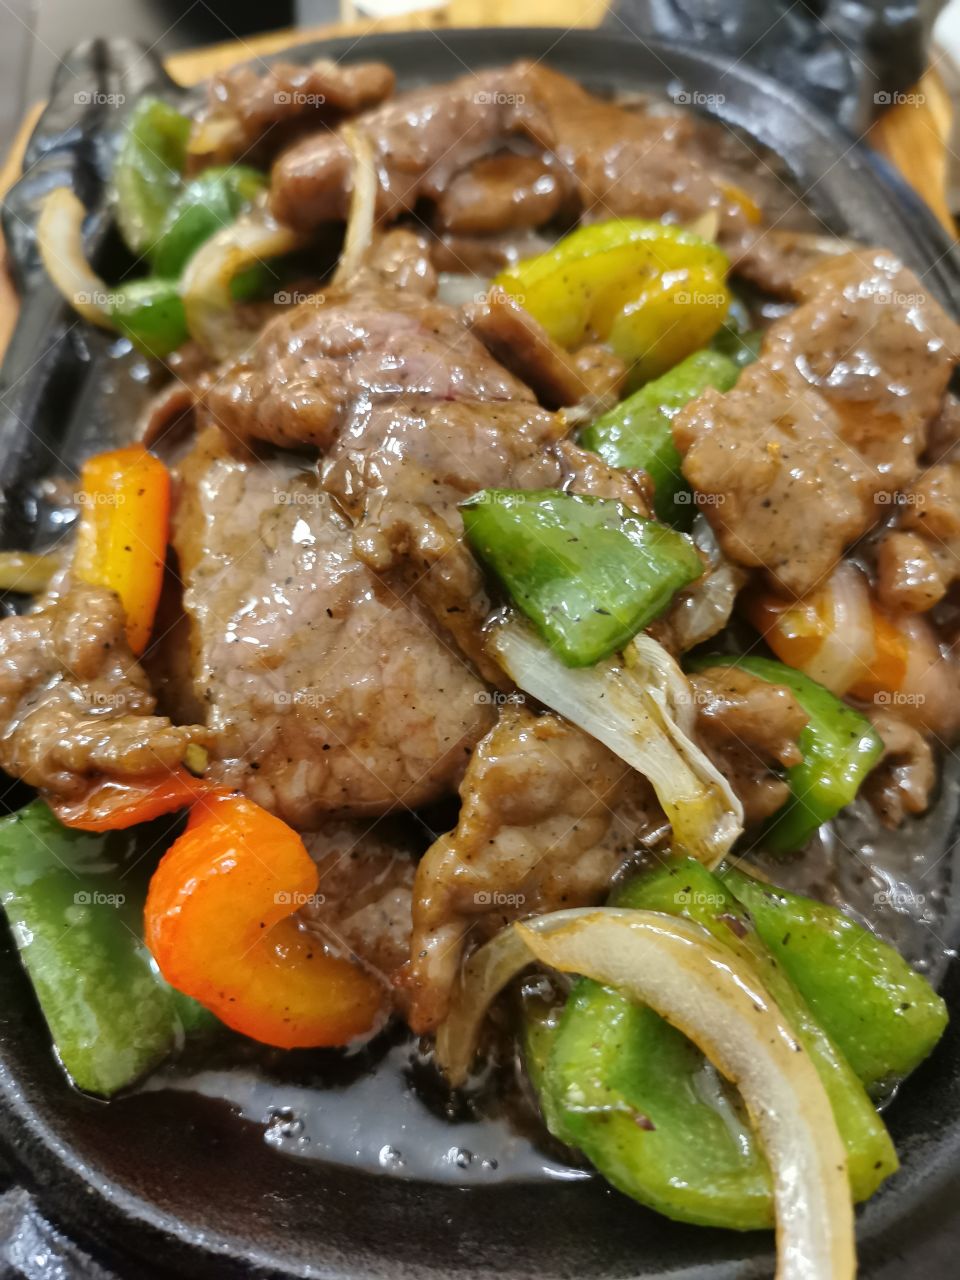 Beef, peppers and onion in black bean sauce.